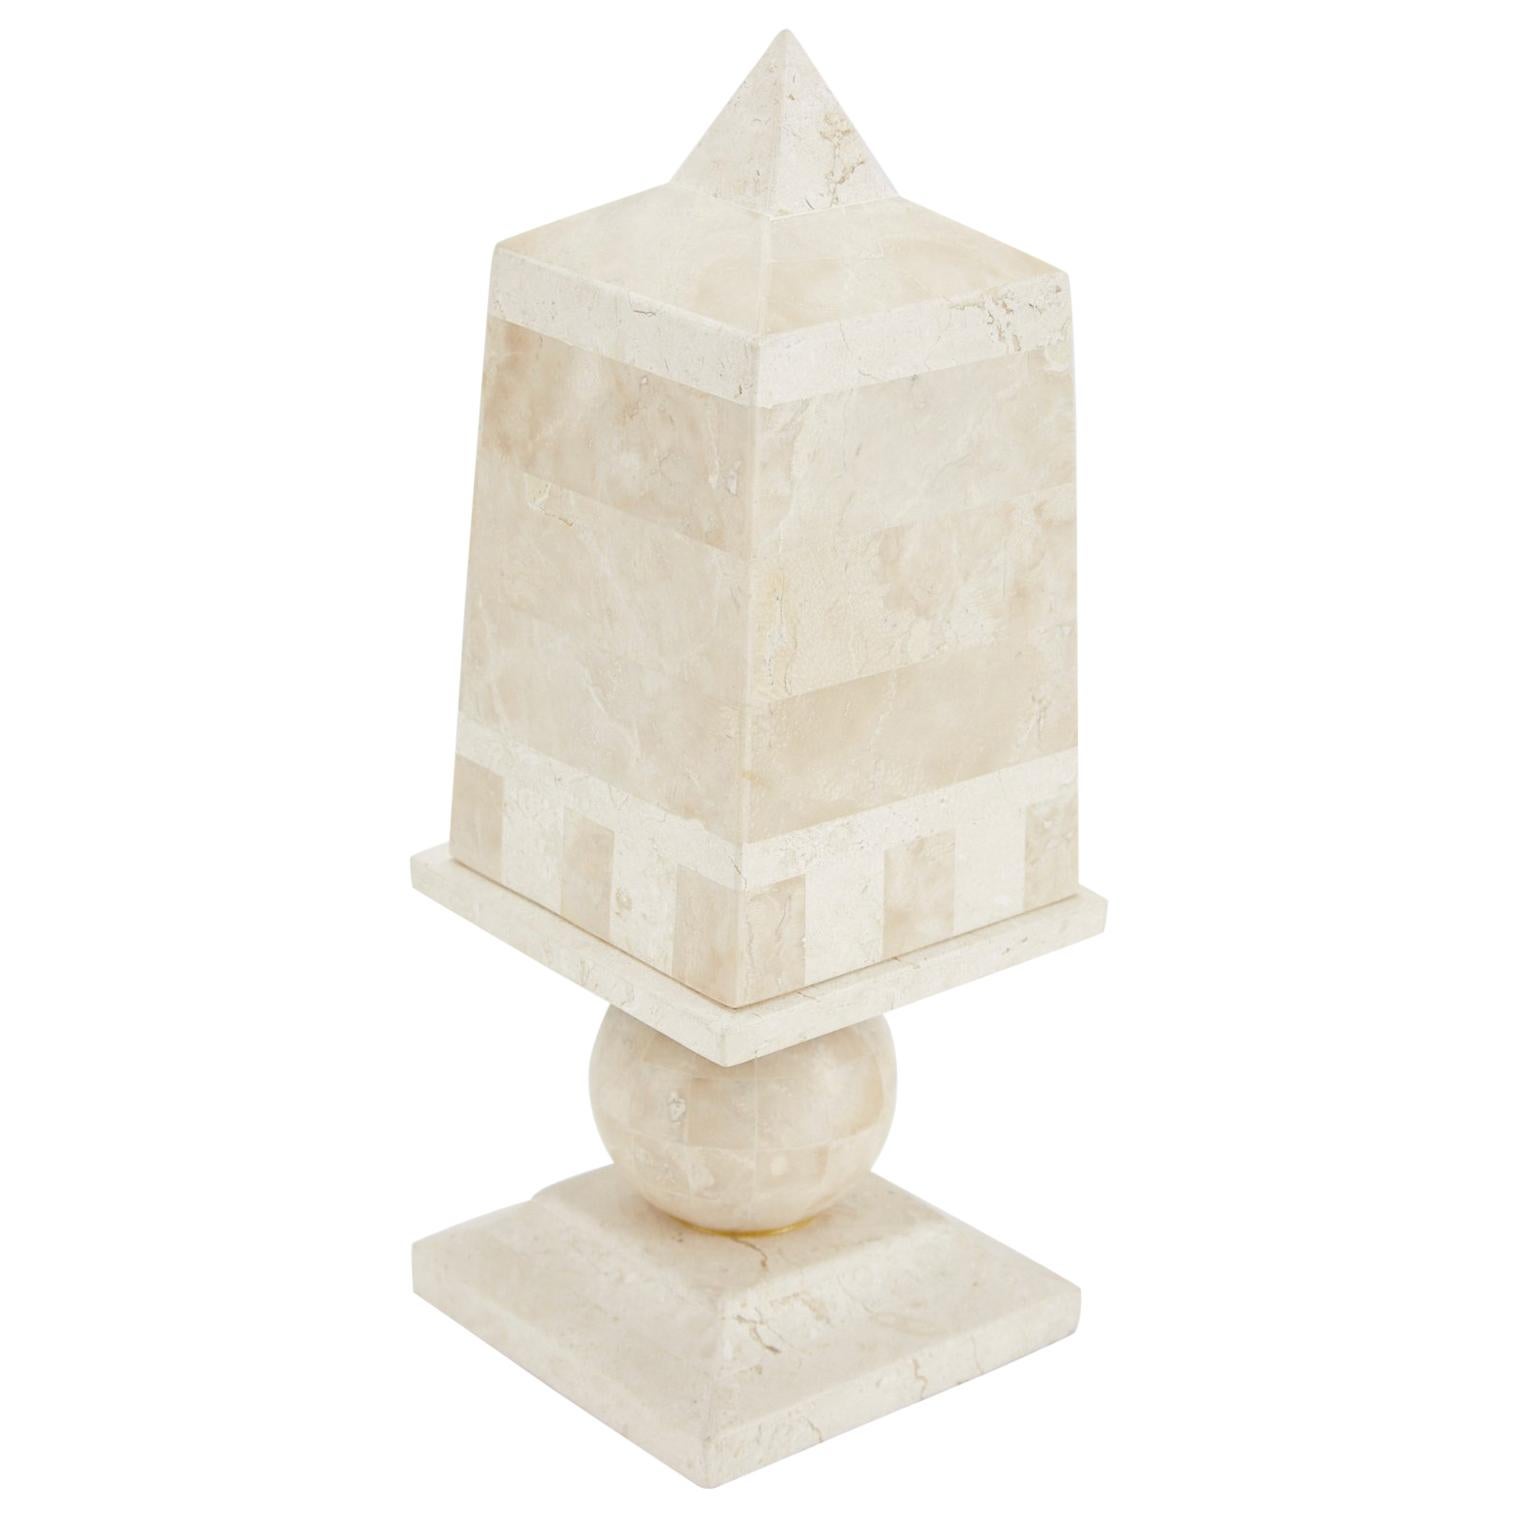 Postmodern Obelisk Shaped Two-Toned Tessellated Stone Secret Box, 1990s For Sale